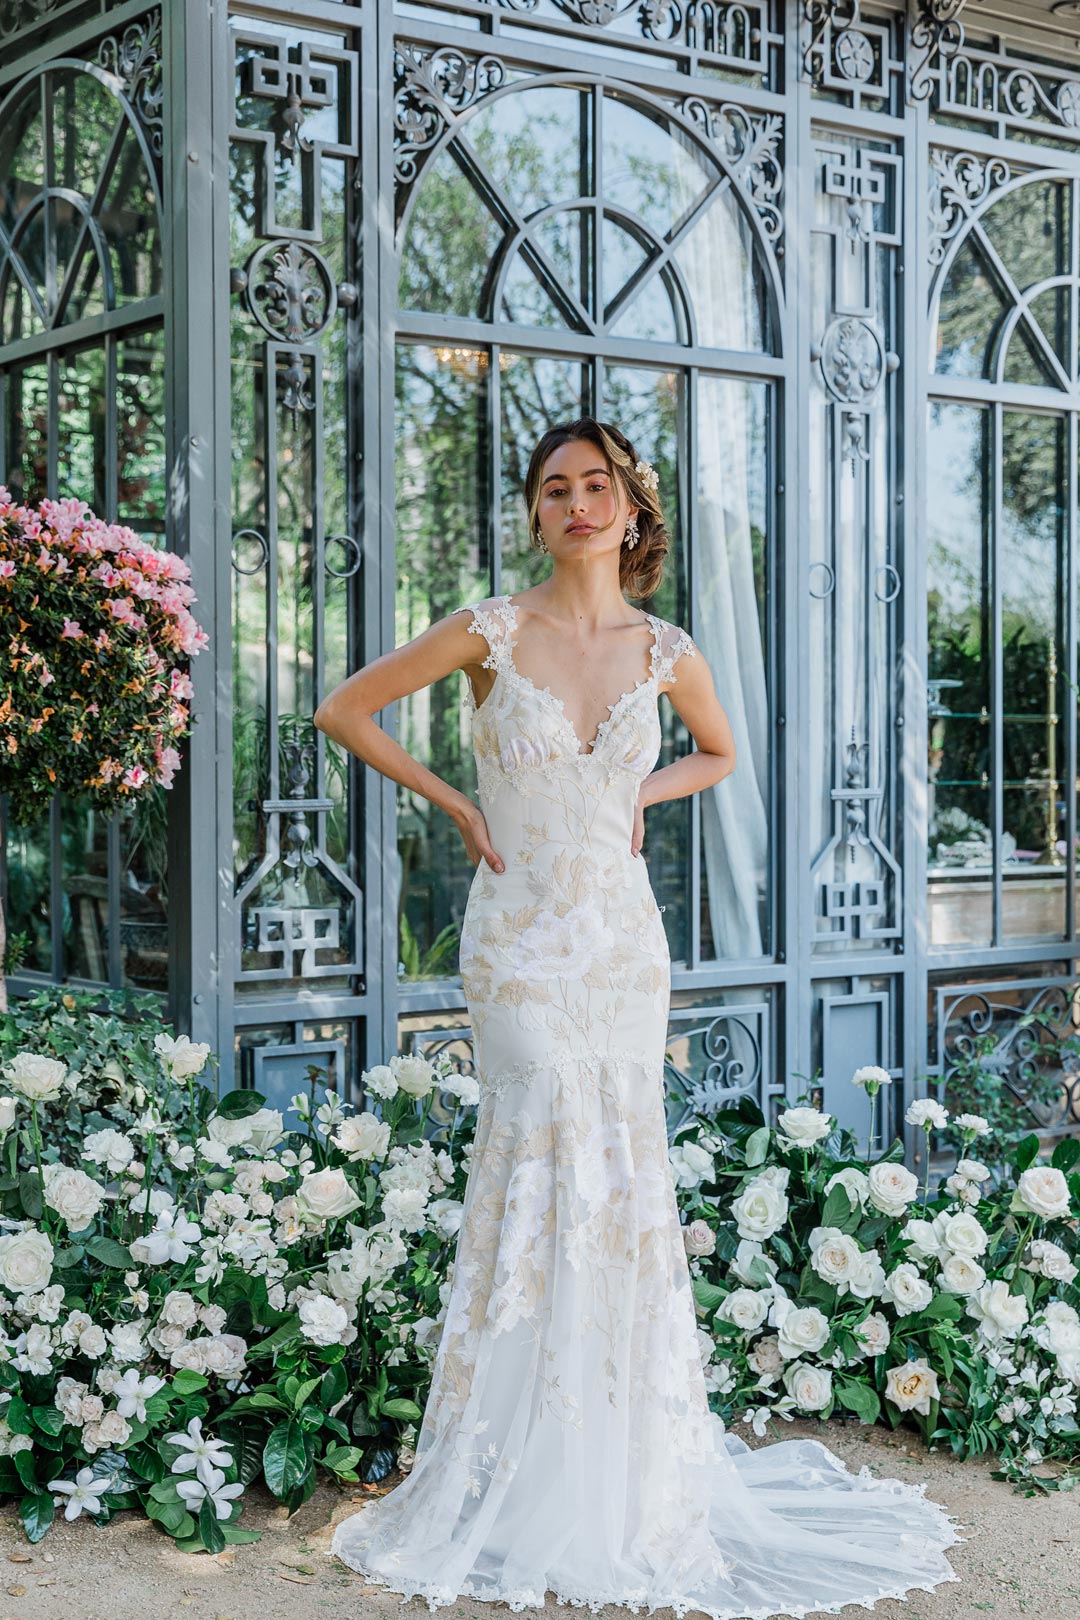 Cherry Blossum Mermaid style wedding dress with lace embroidery